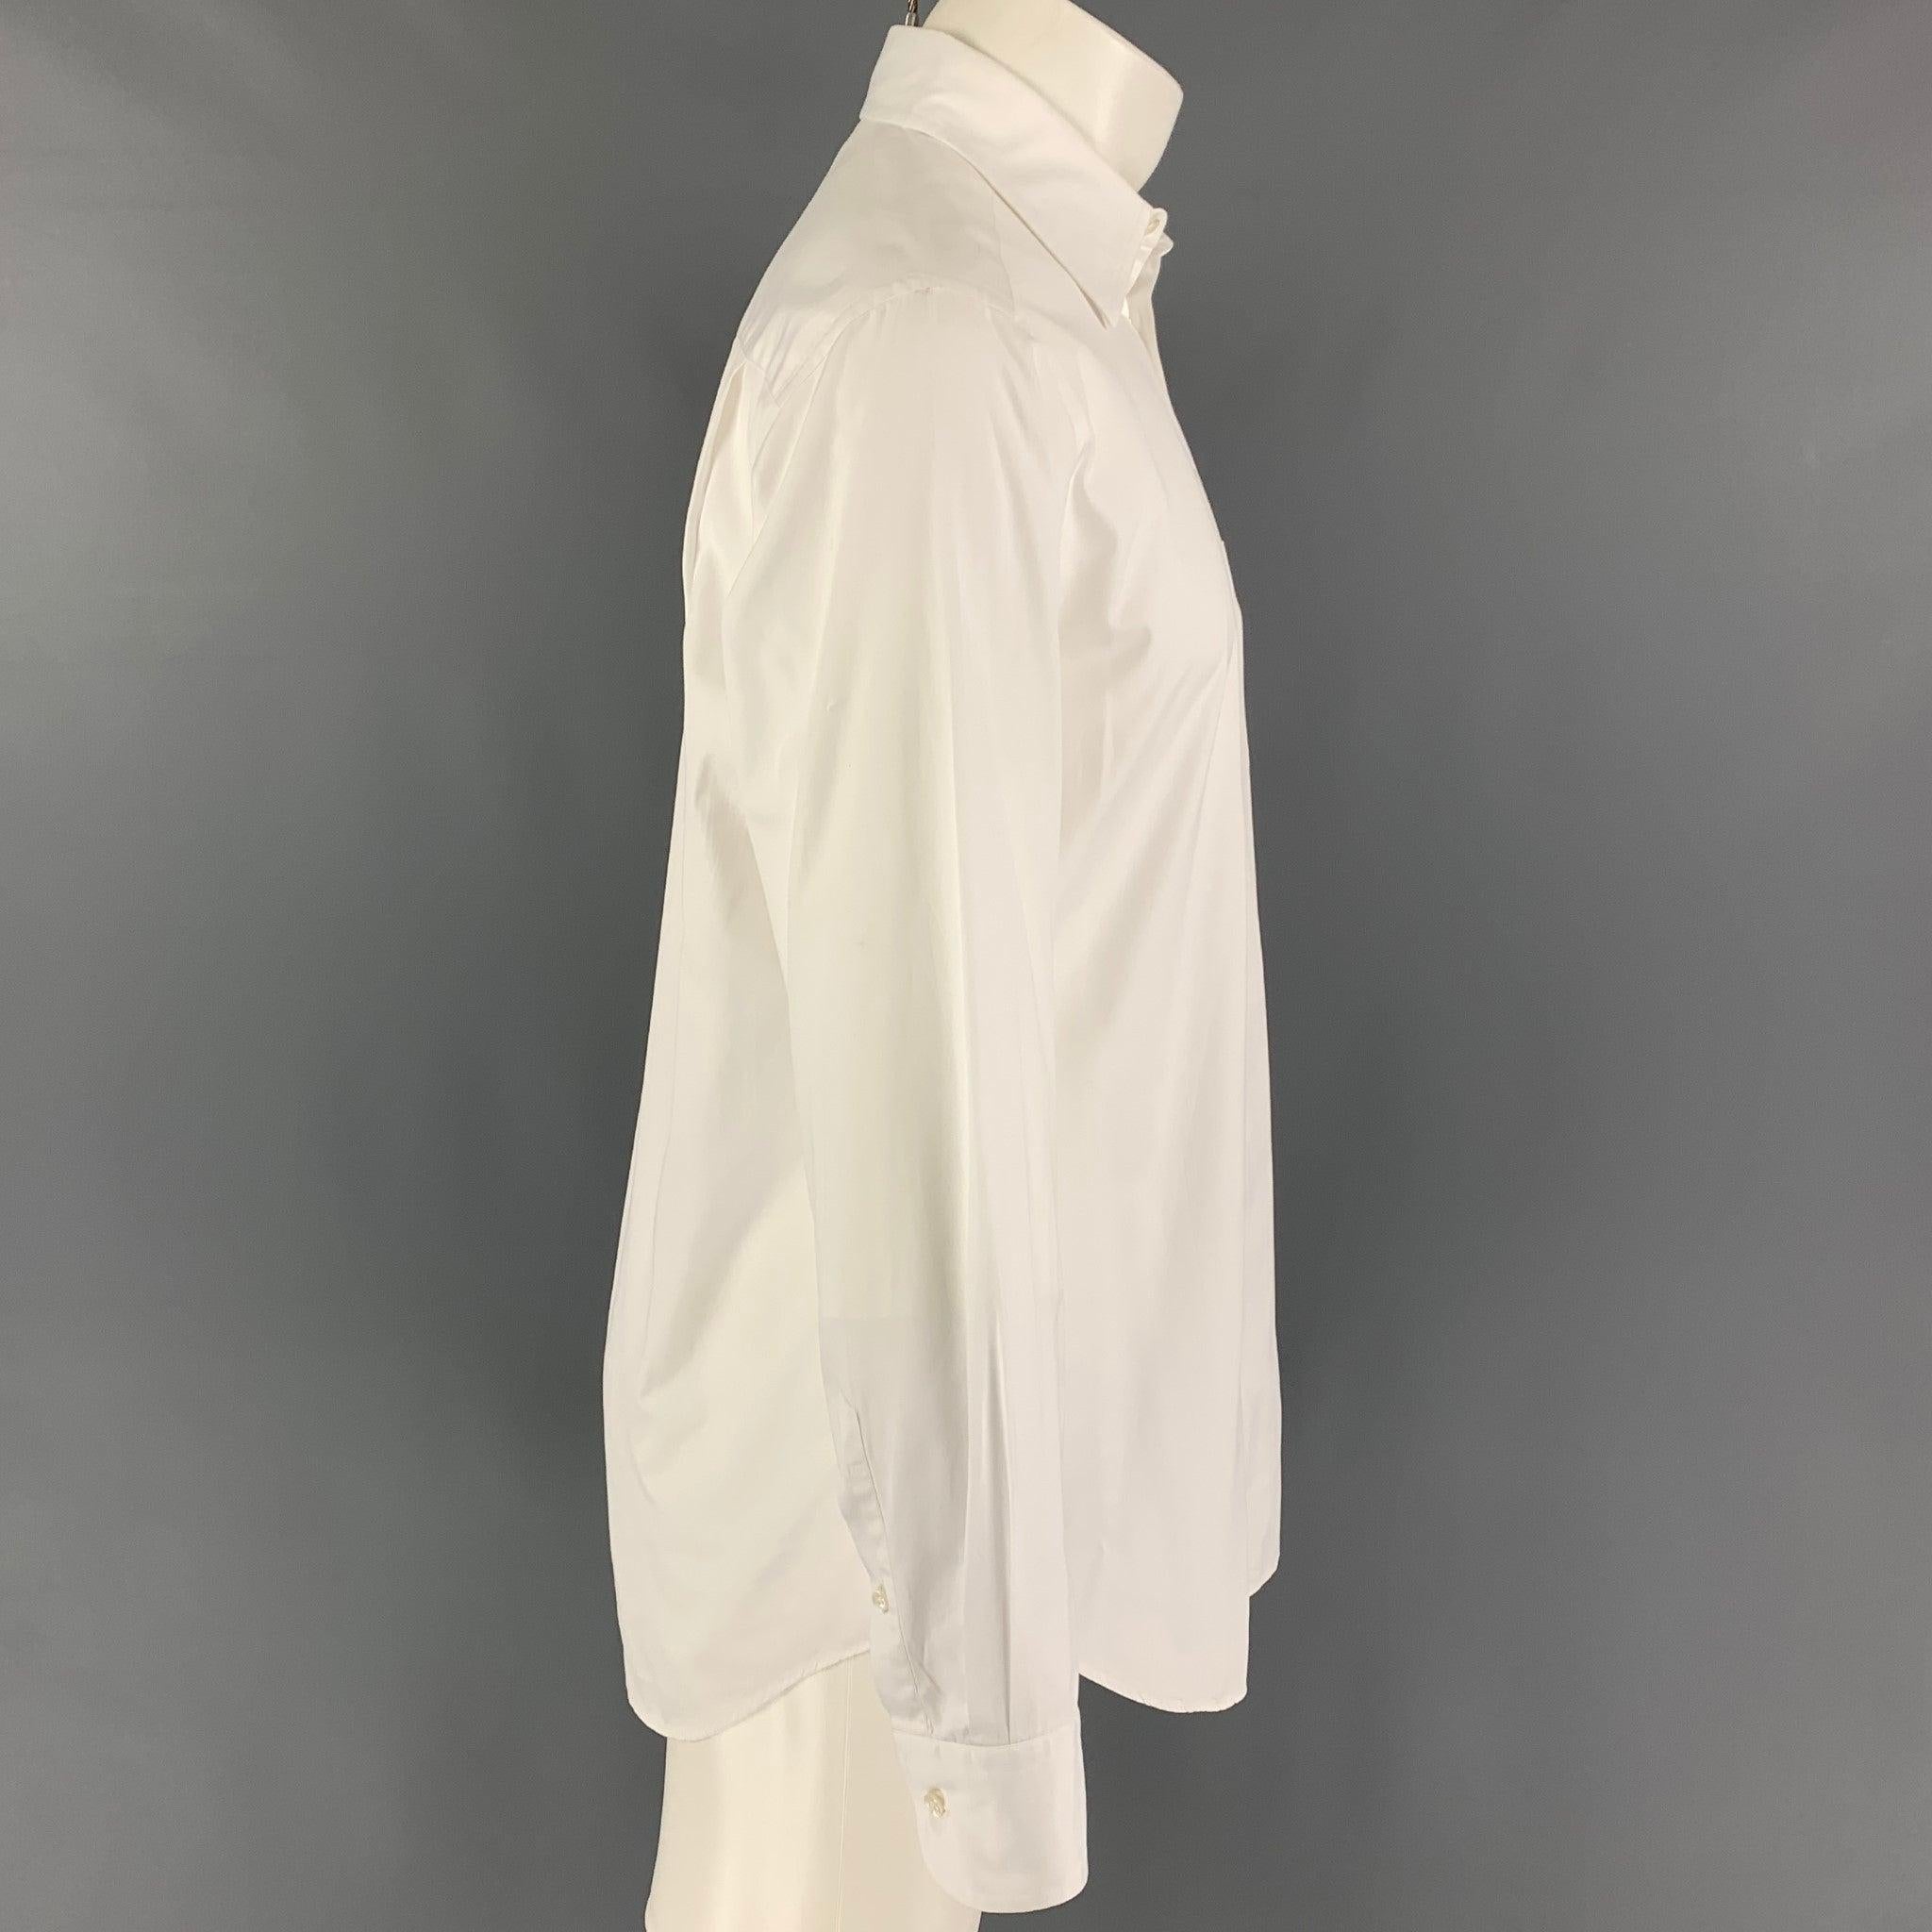 GIORGIO ARMANI long sleeve shirt comes in a white cotton featuring a classic style, spread collar, patch pocket, and a button up closure. Made in Italy.
 Good Pre-Owned Condition. Light discoloration at front & sleeve. As-is.  
 

 Marked:  39/15.5